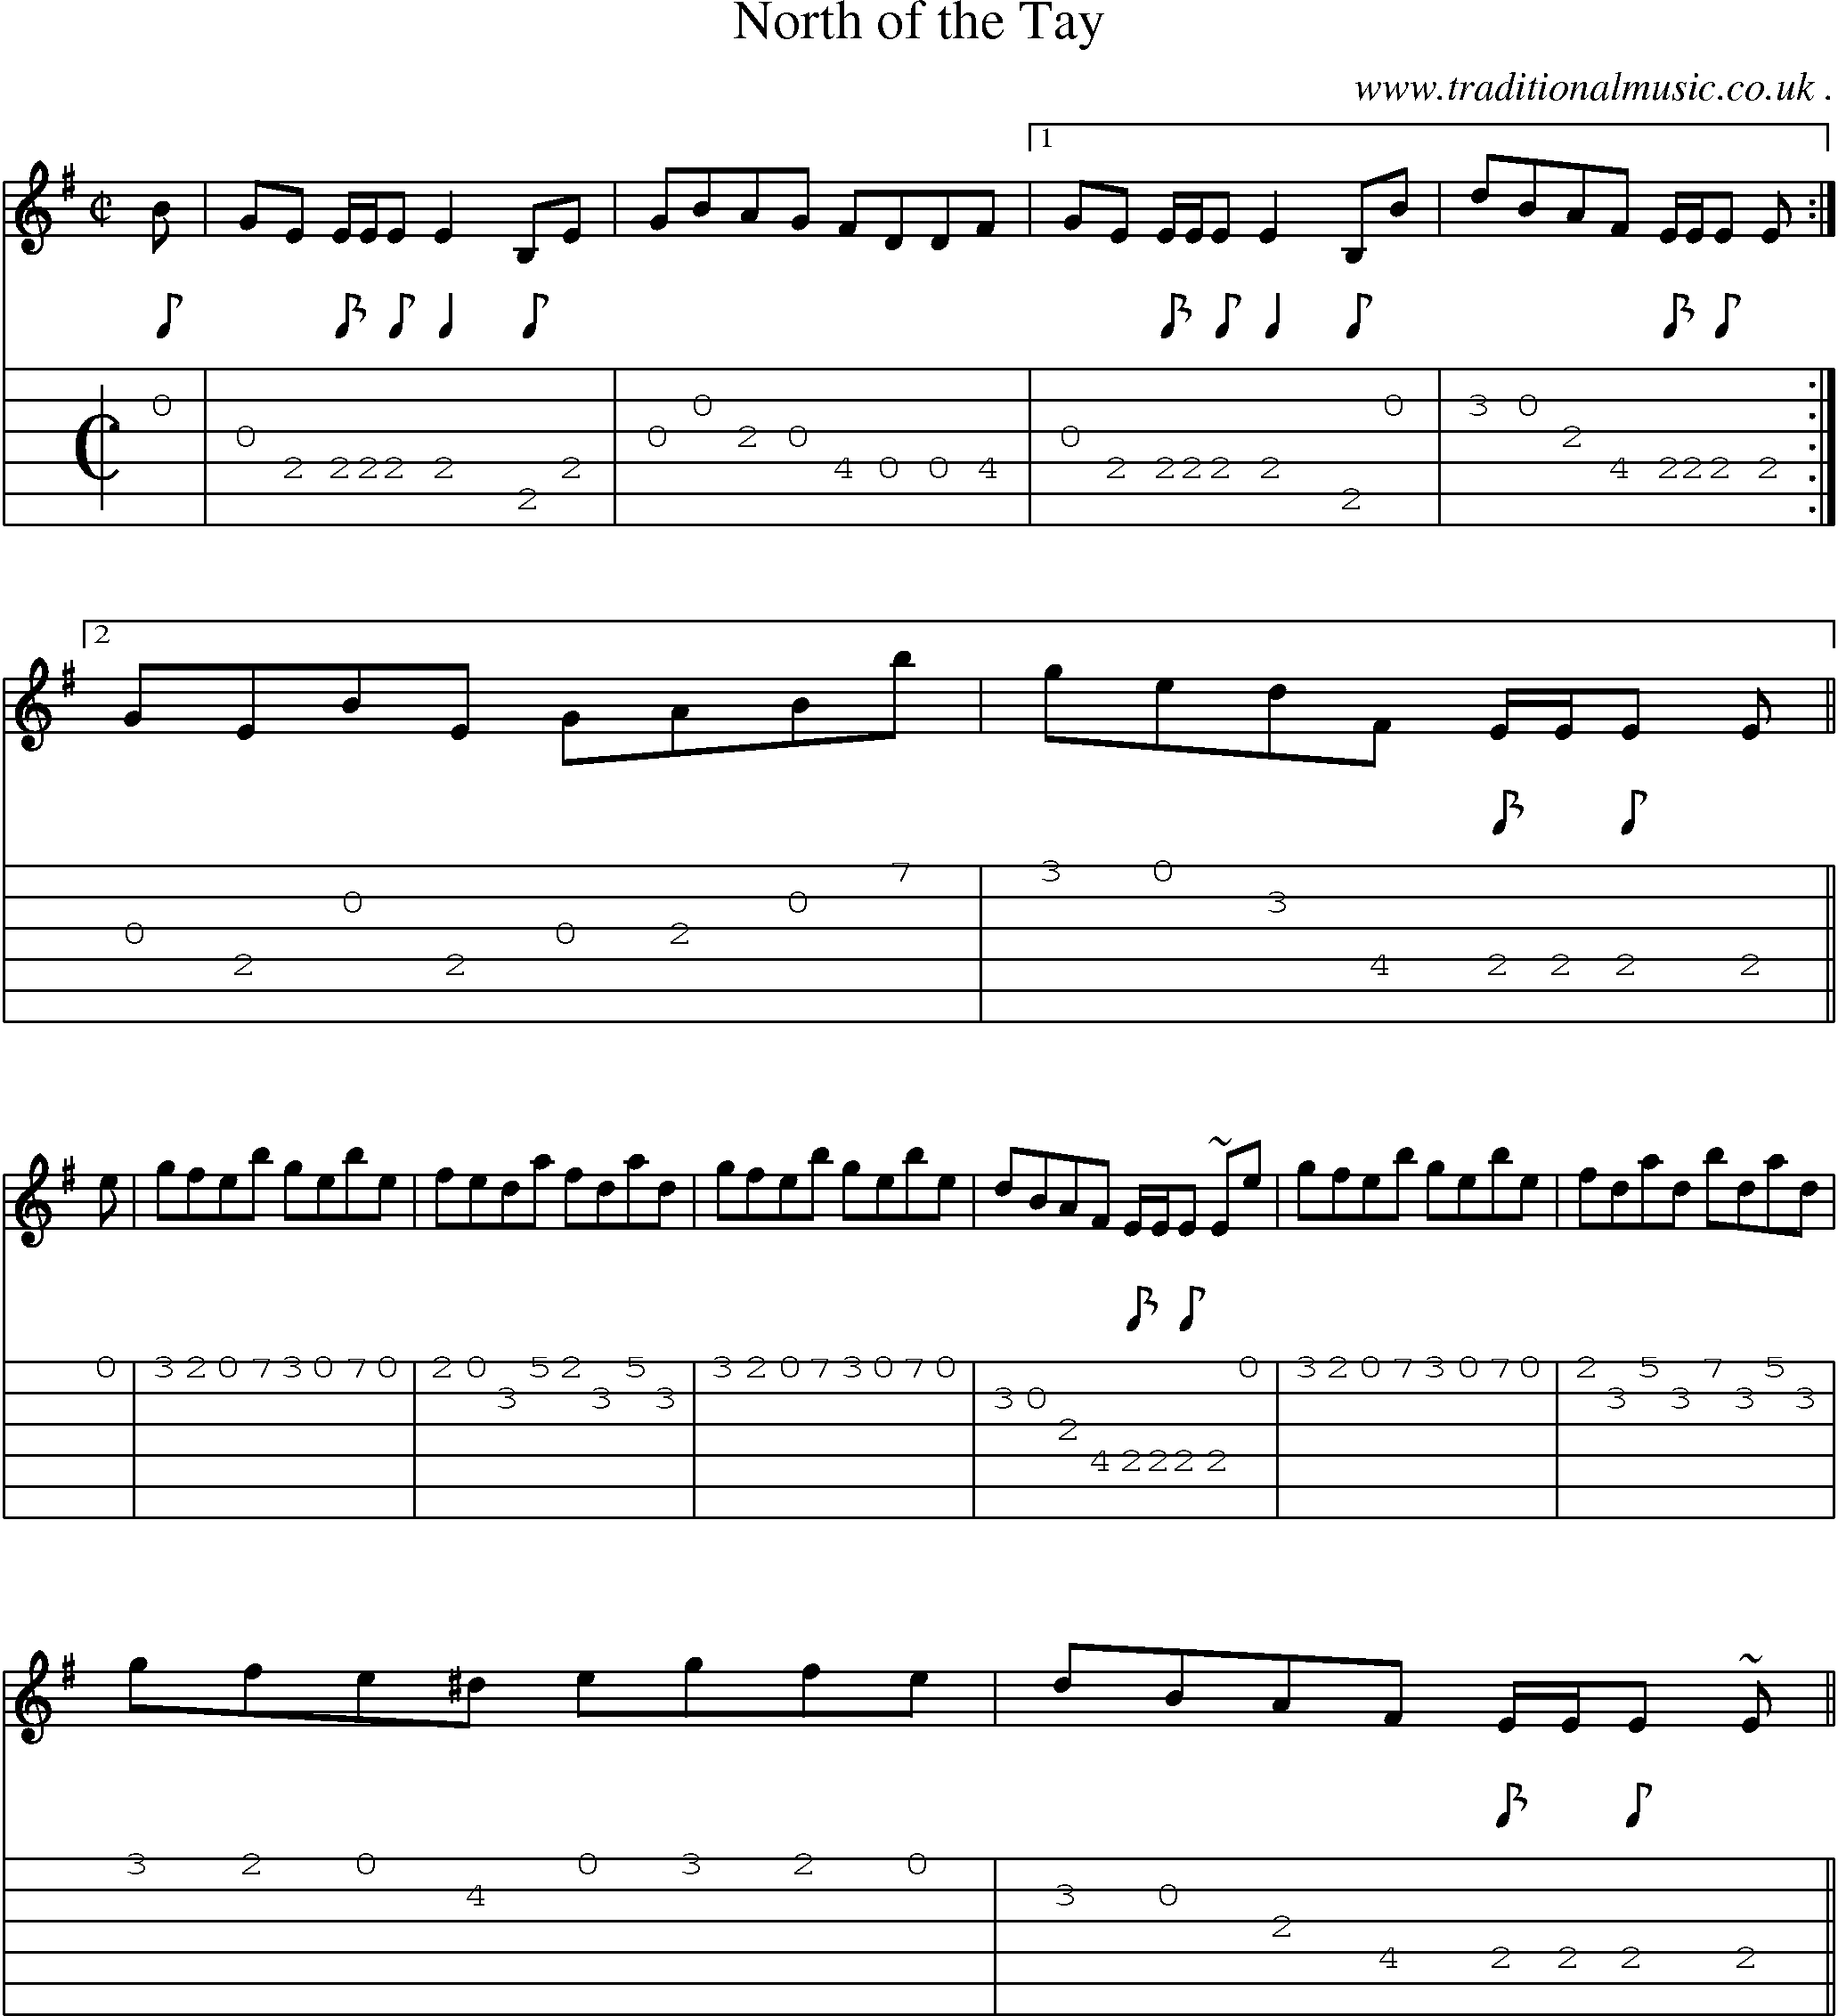 Sheet-music  score, Chords and Guitar Tabs for North Of The Tay